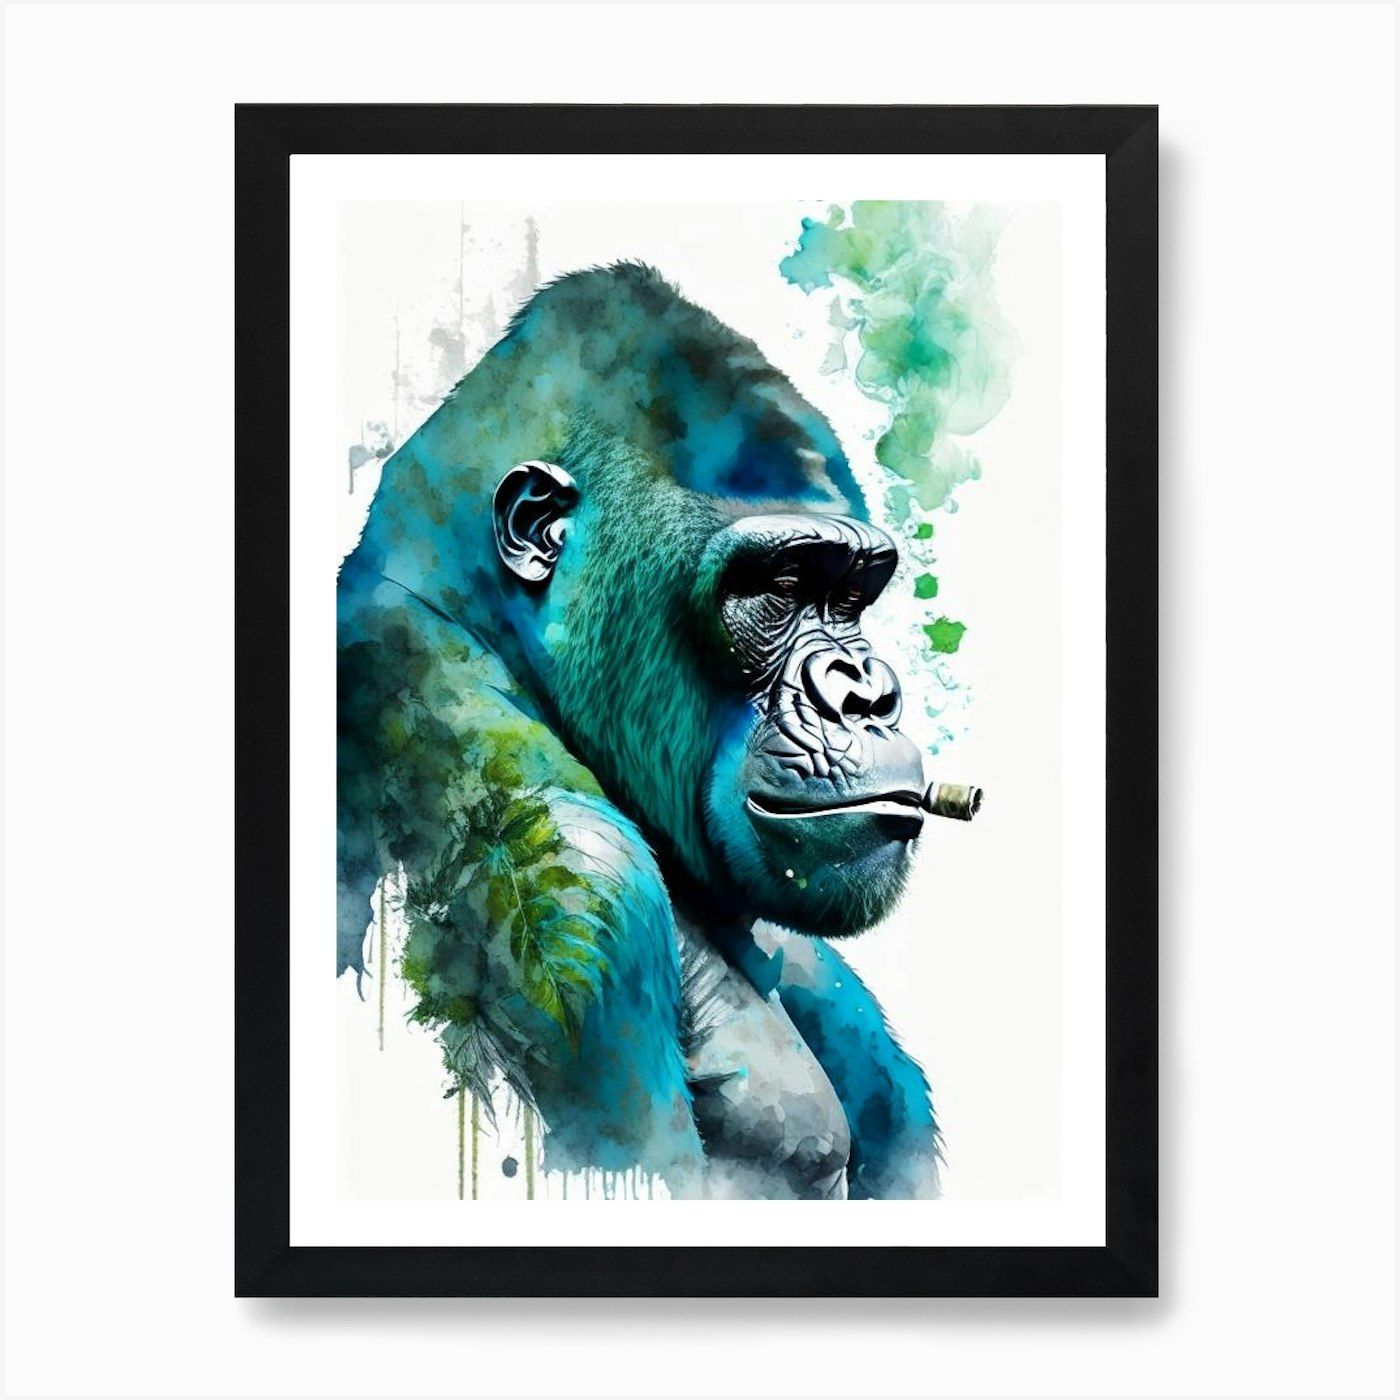 Gorilla Cutting Board, Watercolor Style Artwork of Chimpanzee on a Tree  Wildlife Theme, Decorative Tempered Glass Cutting and Serving Board, in 3